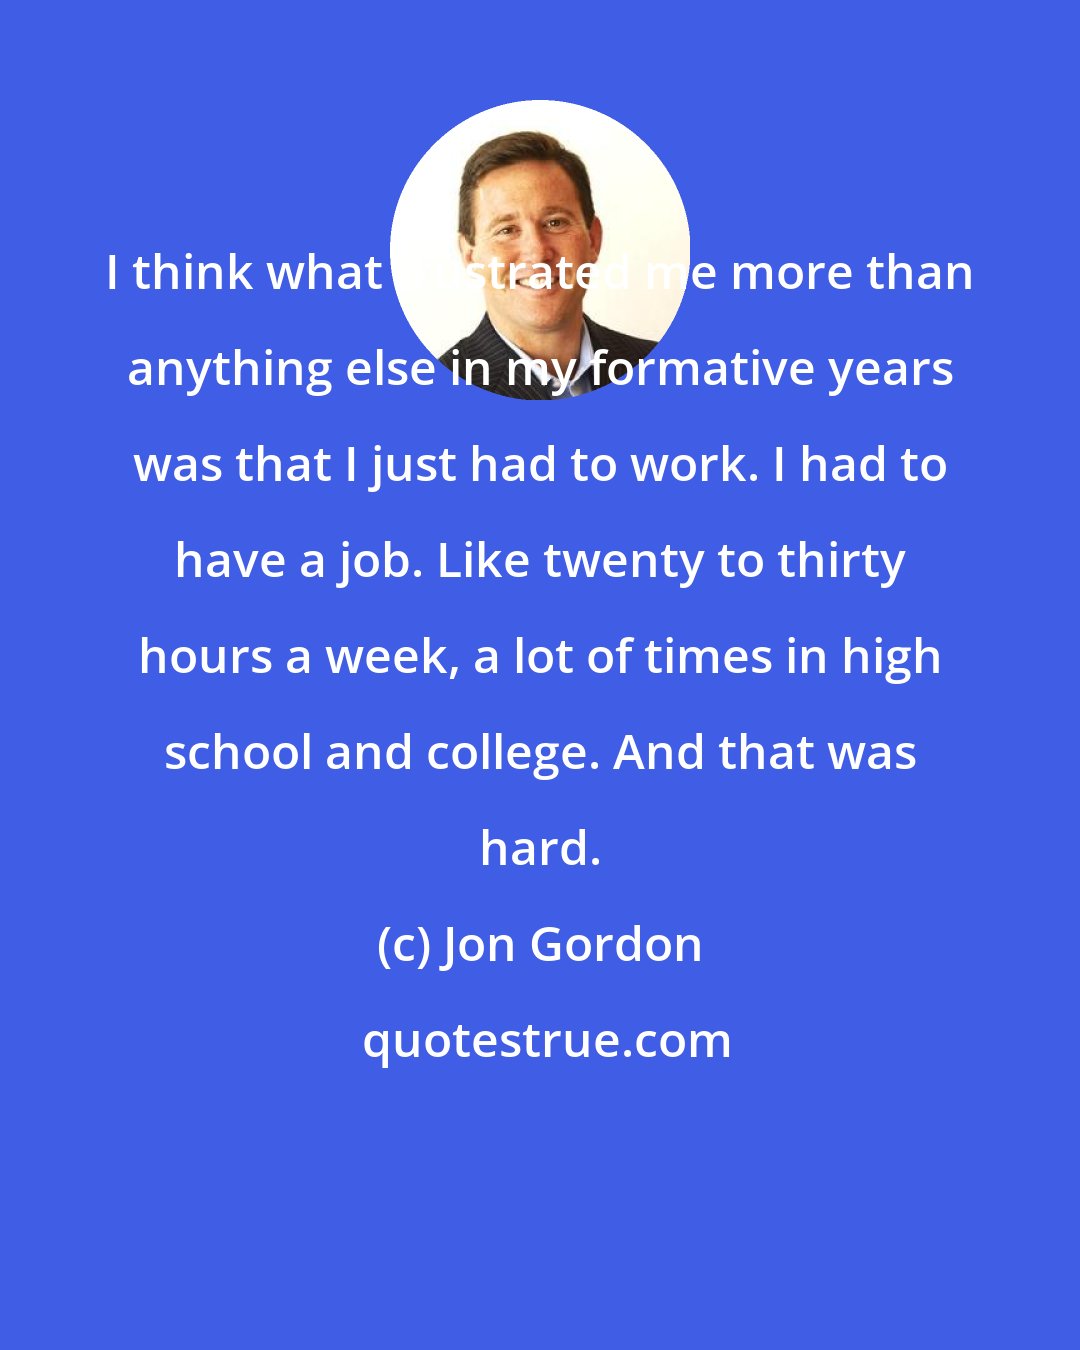 Jon Gordon: I think what frustrated me more than anything else in my formative years was that I just had to work. I had to have a job. Like twenty to thirty hours a week, a lot of times in high school and college. And that was hard.